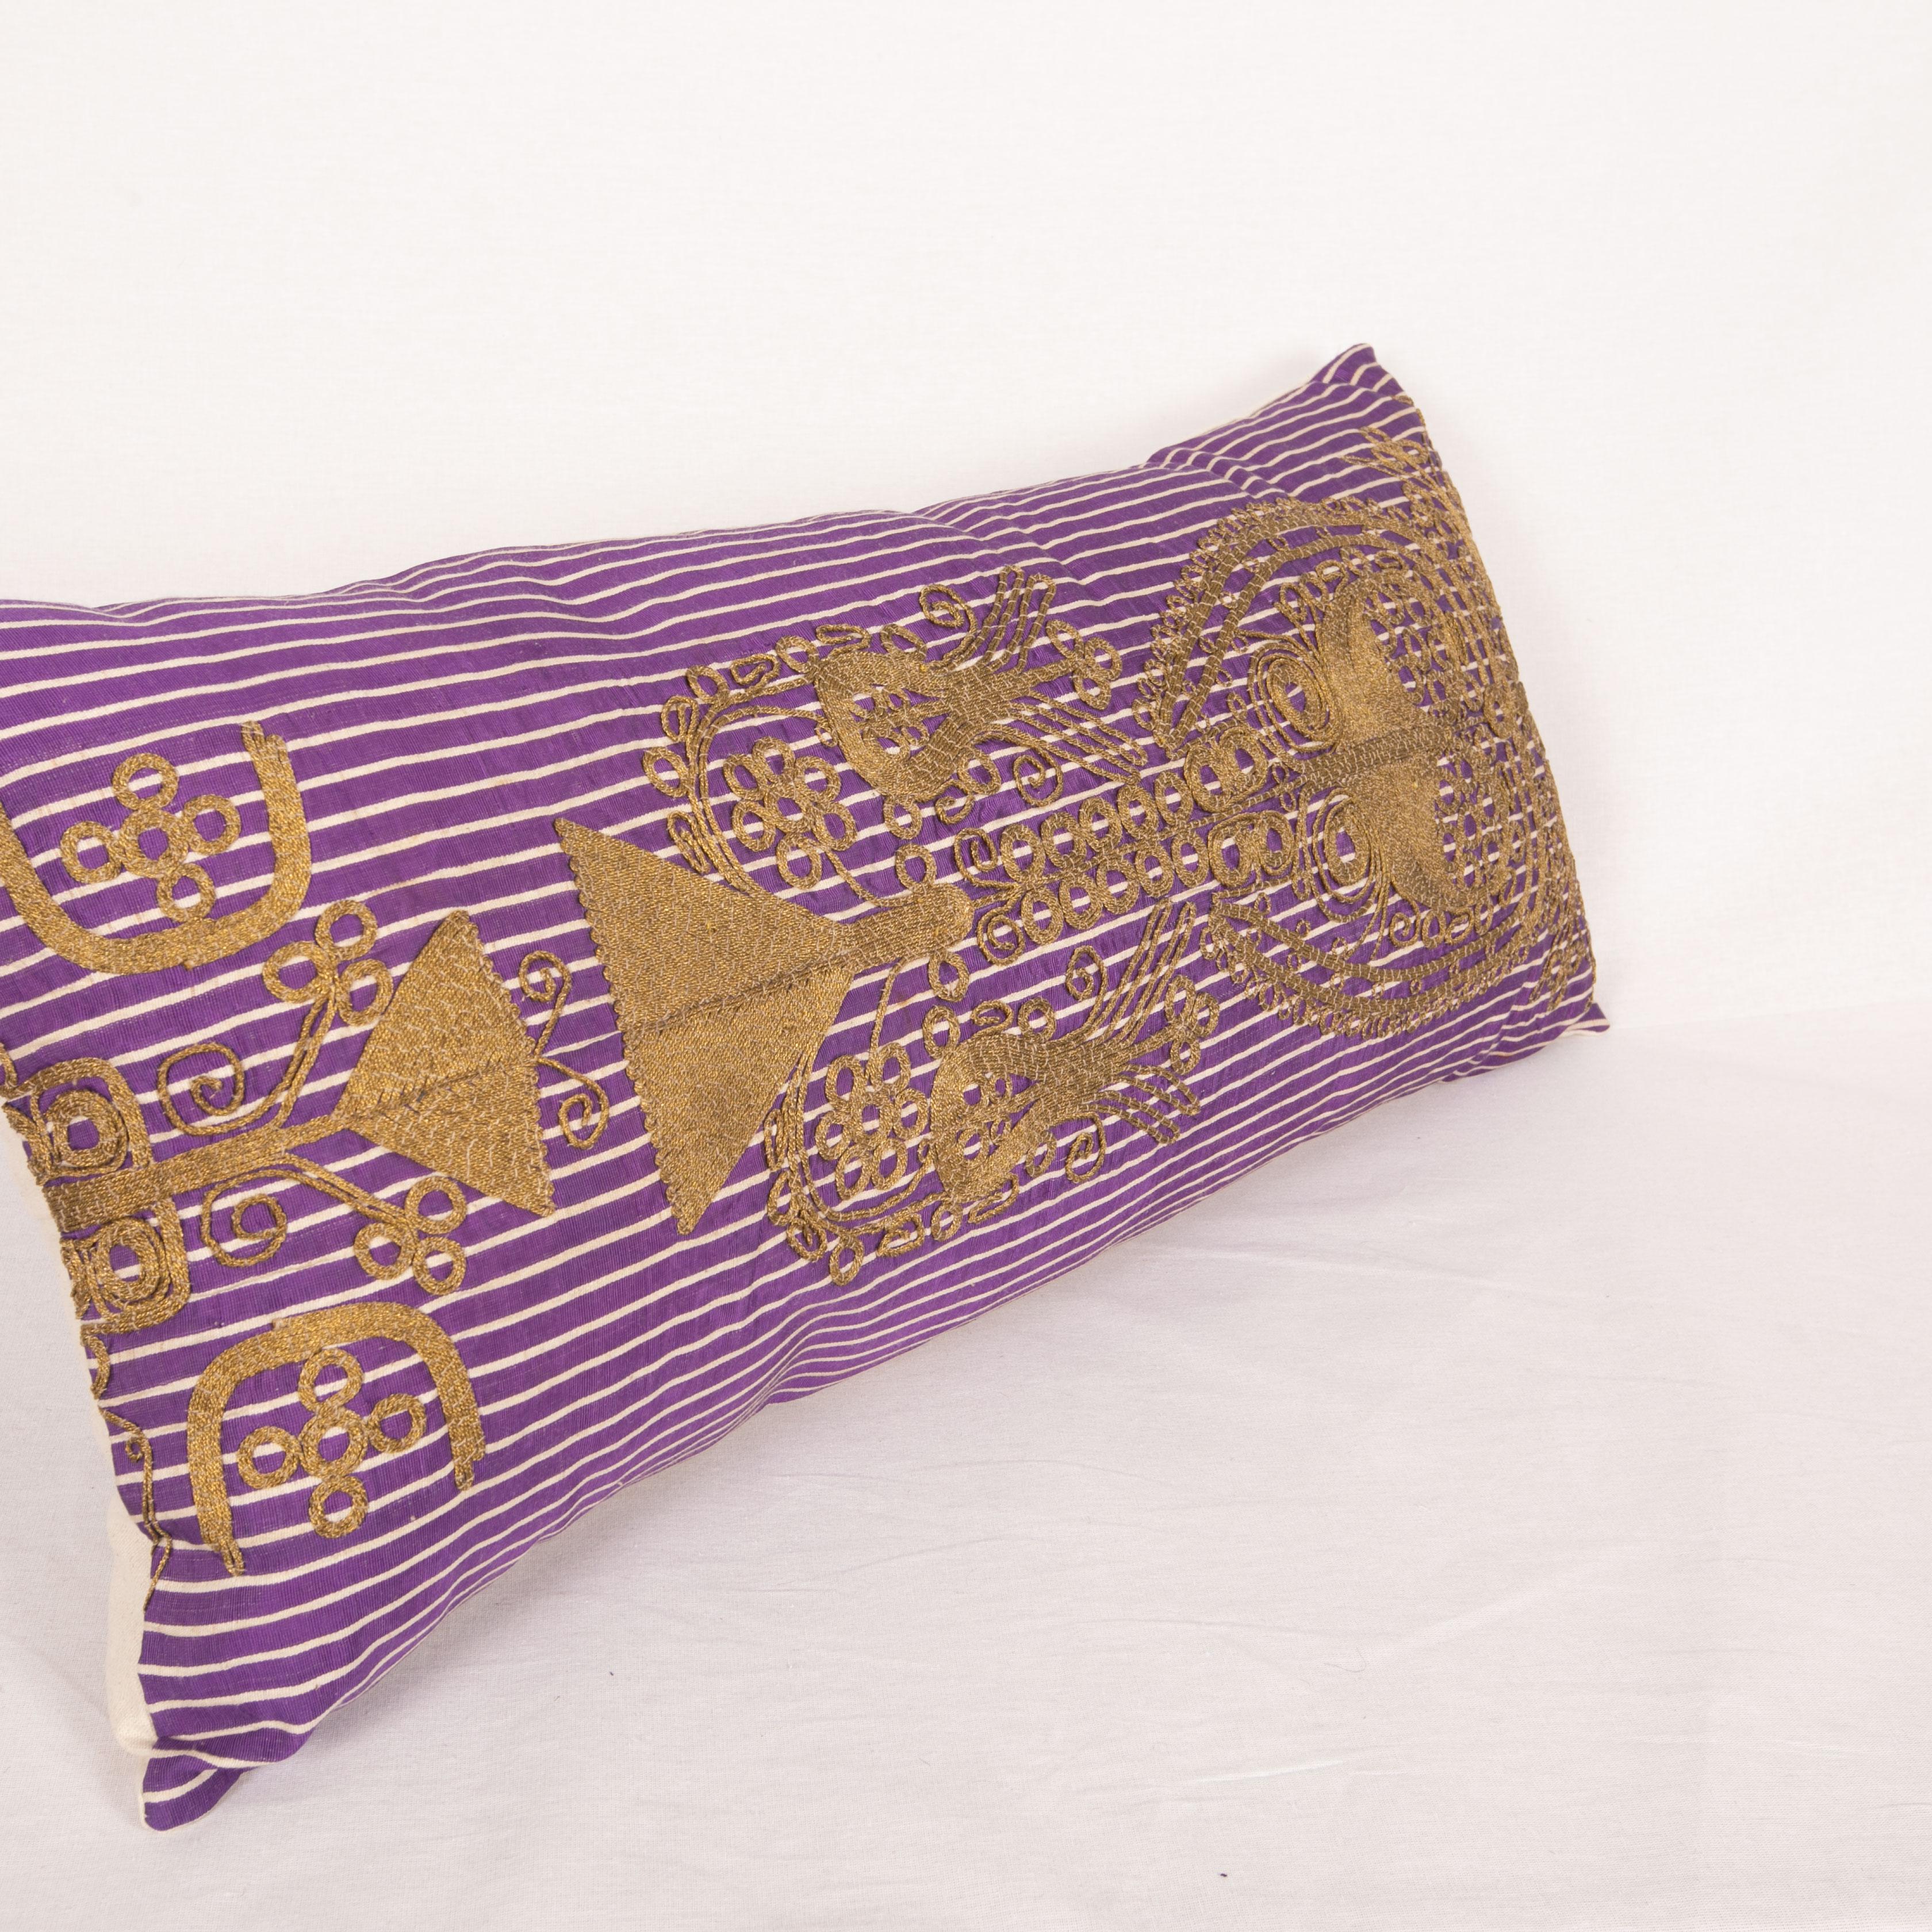 Silk Antique Ottoman Turkish Pillow Case, Early 20th C.